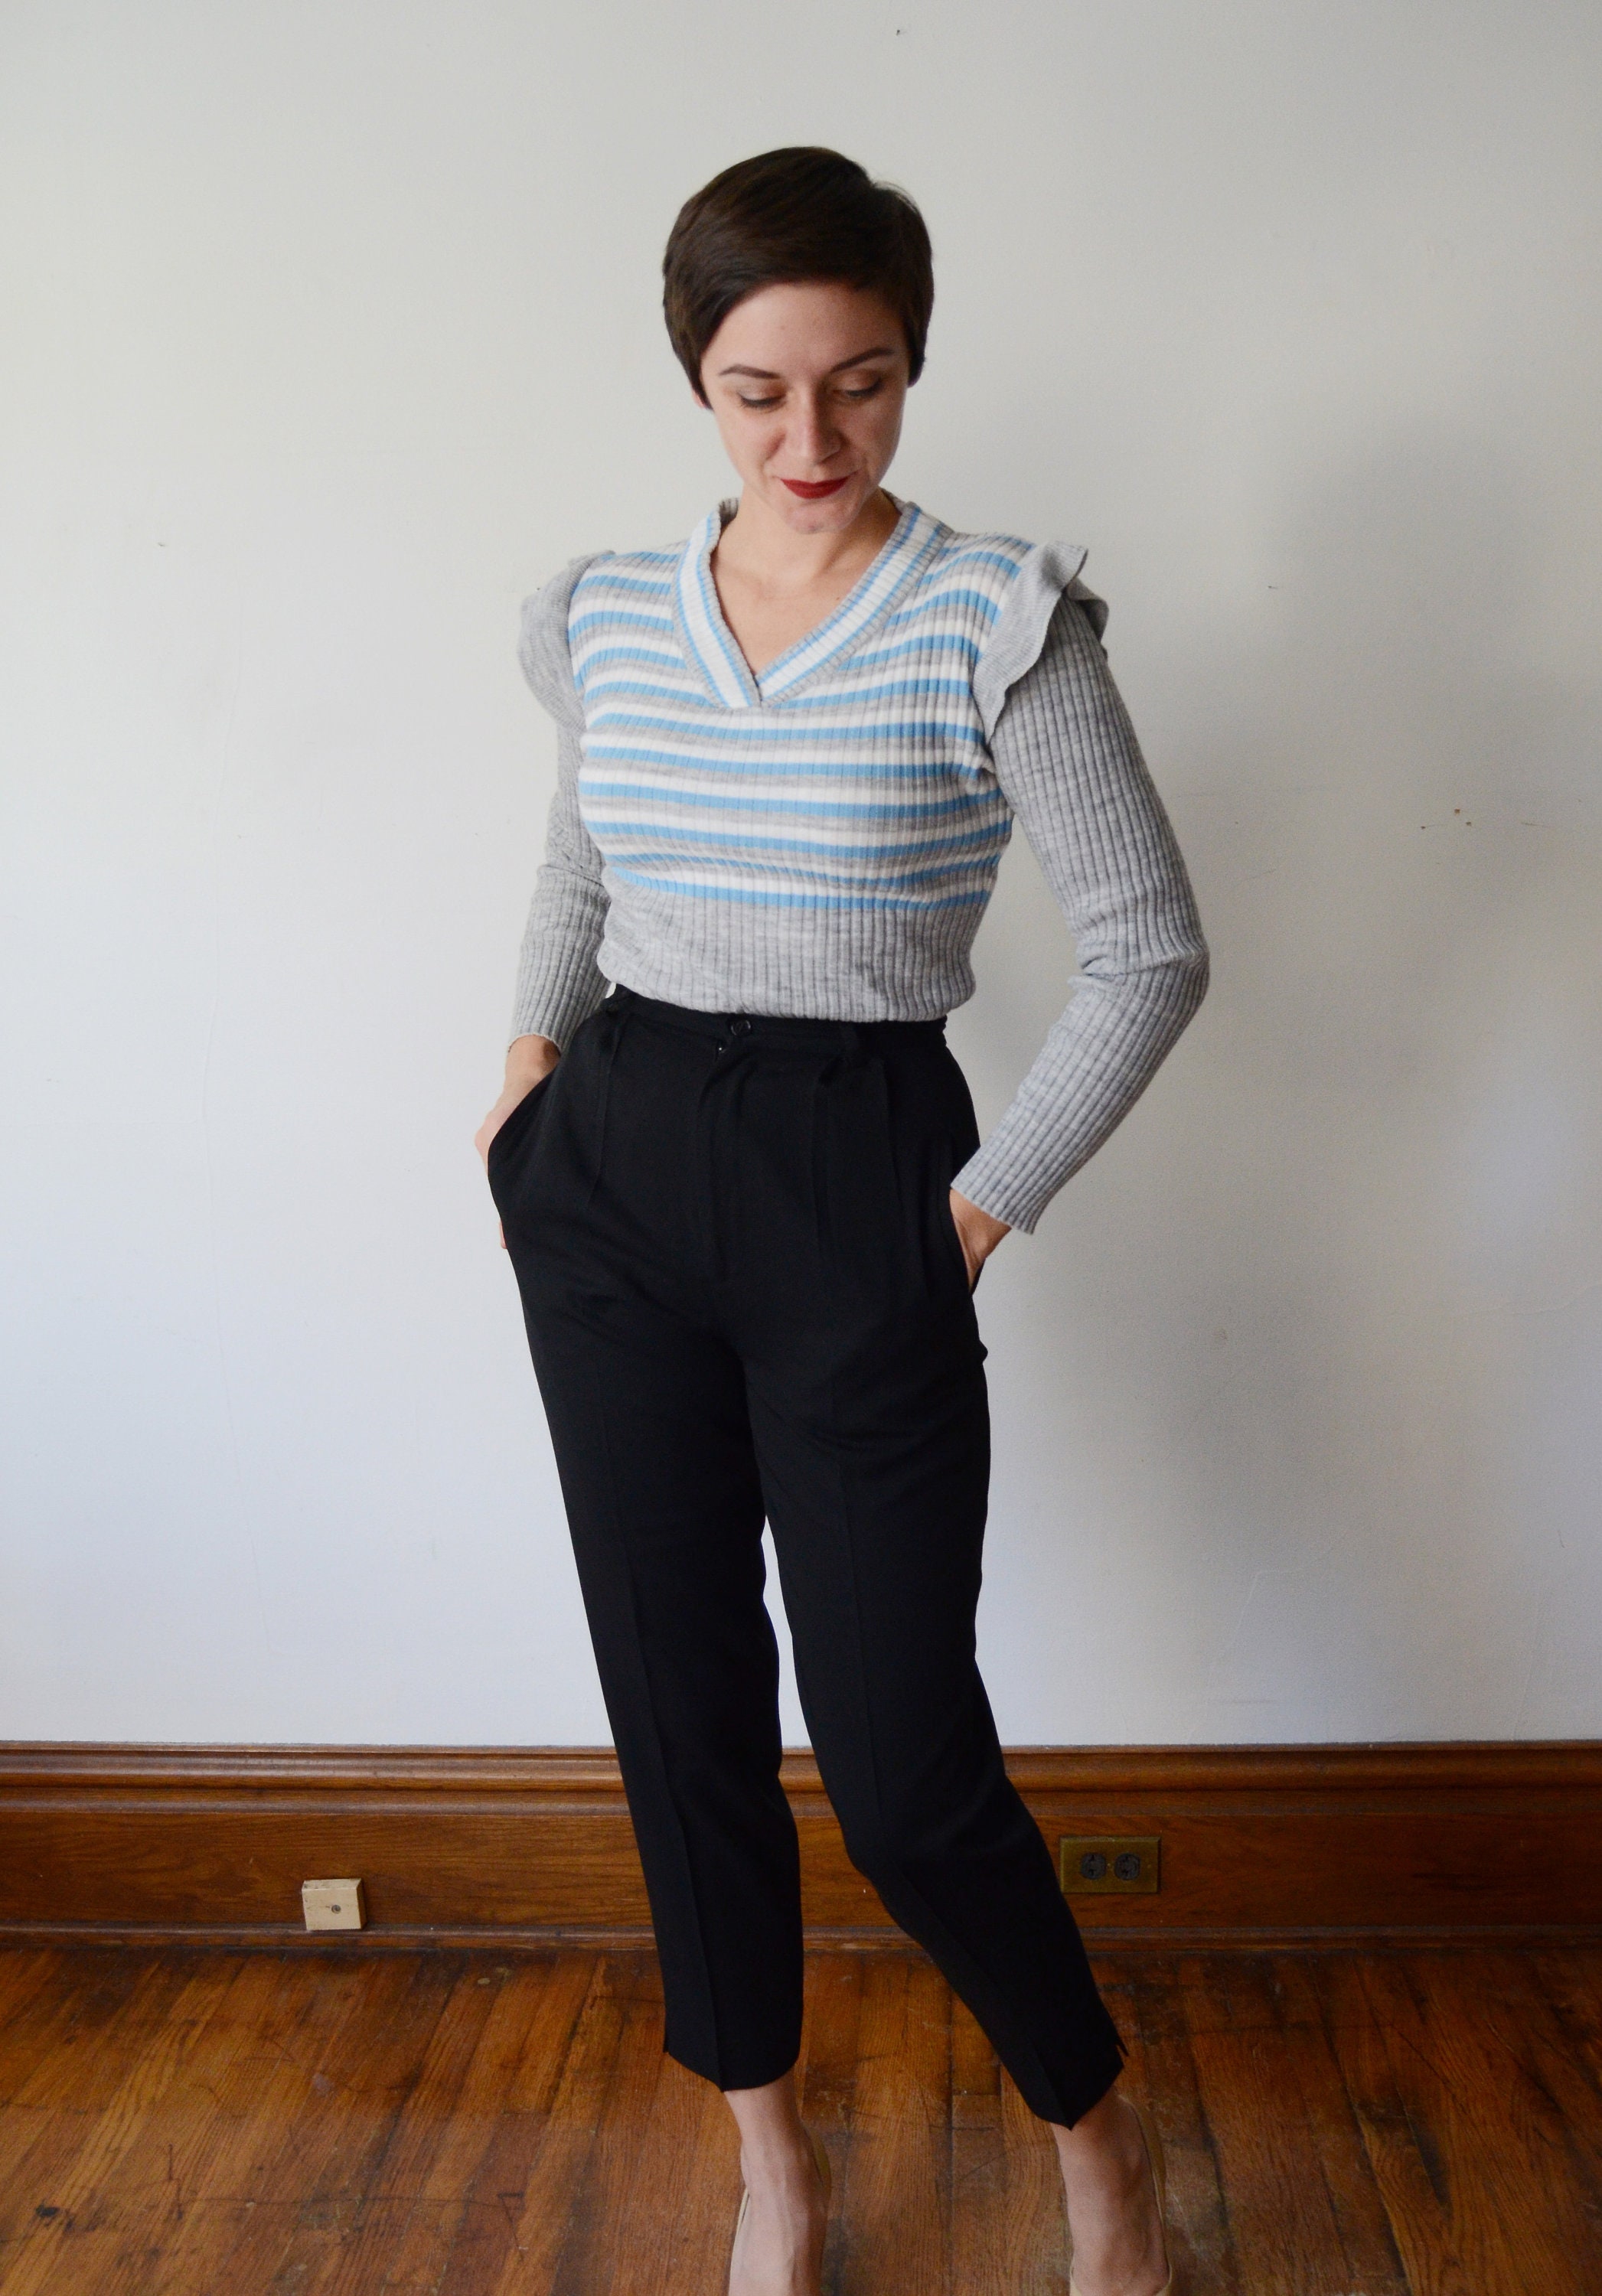 1970s Grey and Blue Striped Sweater with Ruffled Shoulders - S